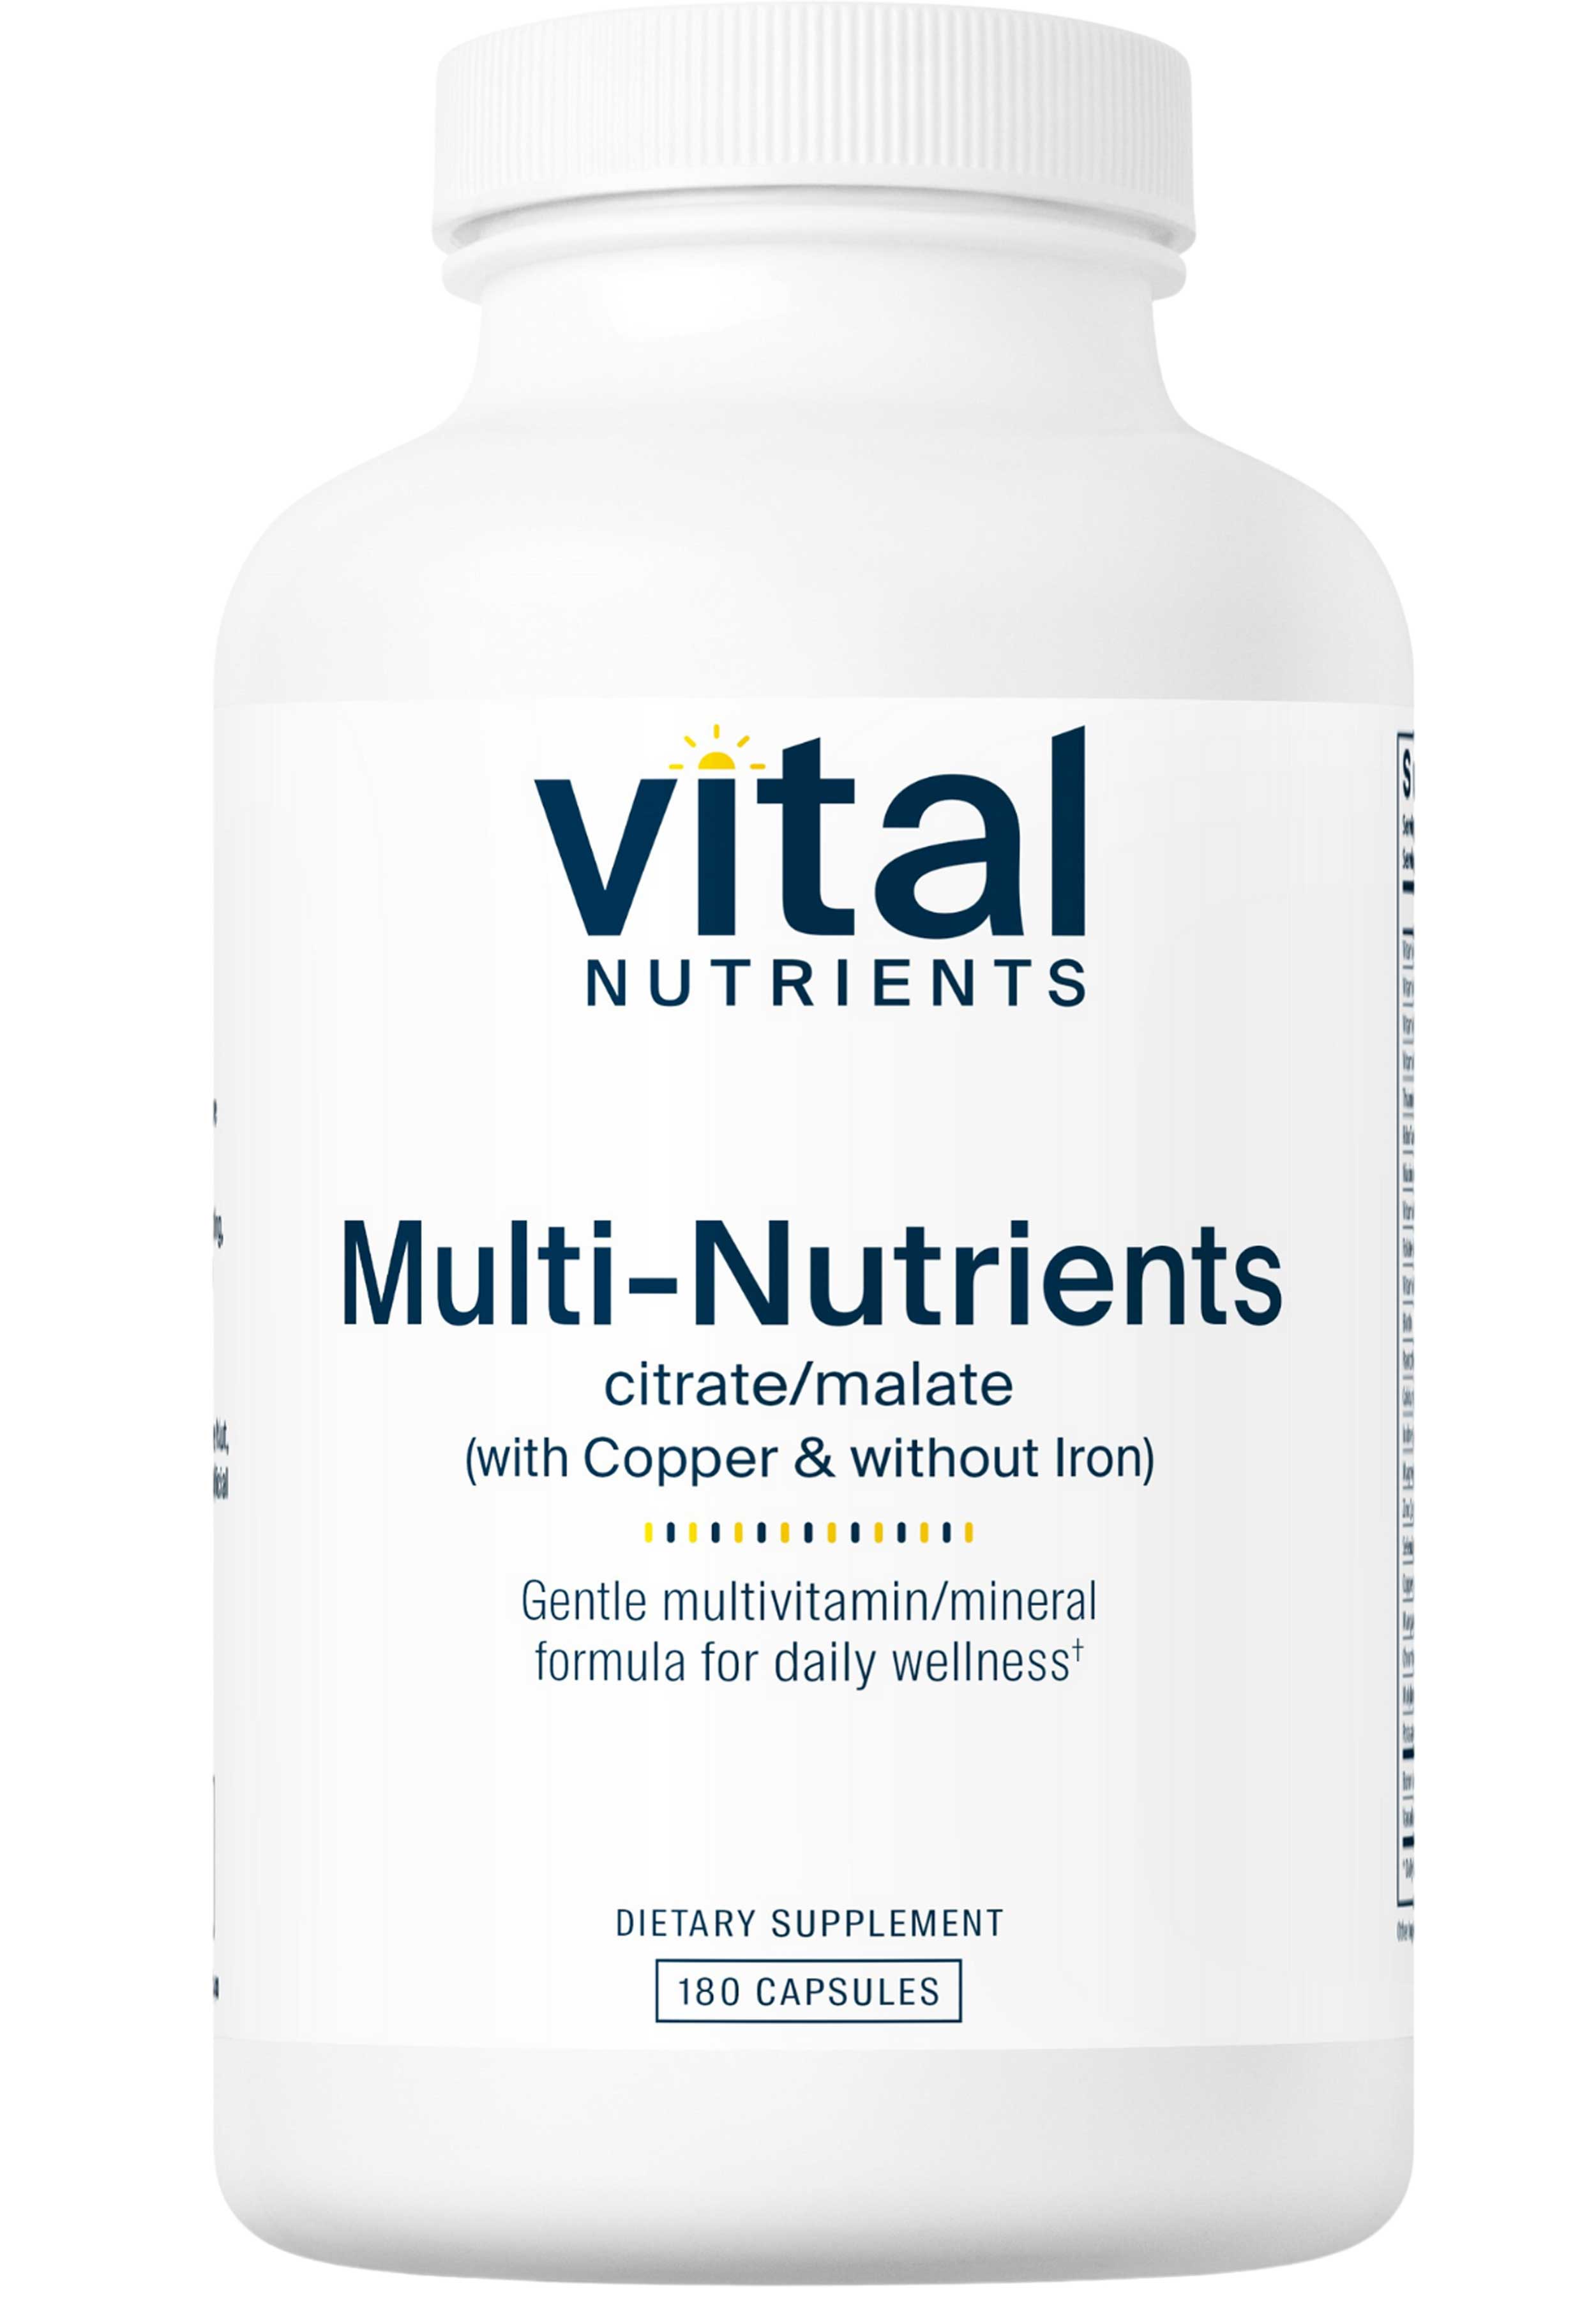 Vital Nutrients Multi-Nutrients Citrate/Malate with Copper, without Iron (Formerly Multi-Nutrients 2)